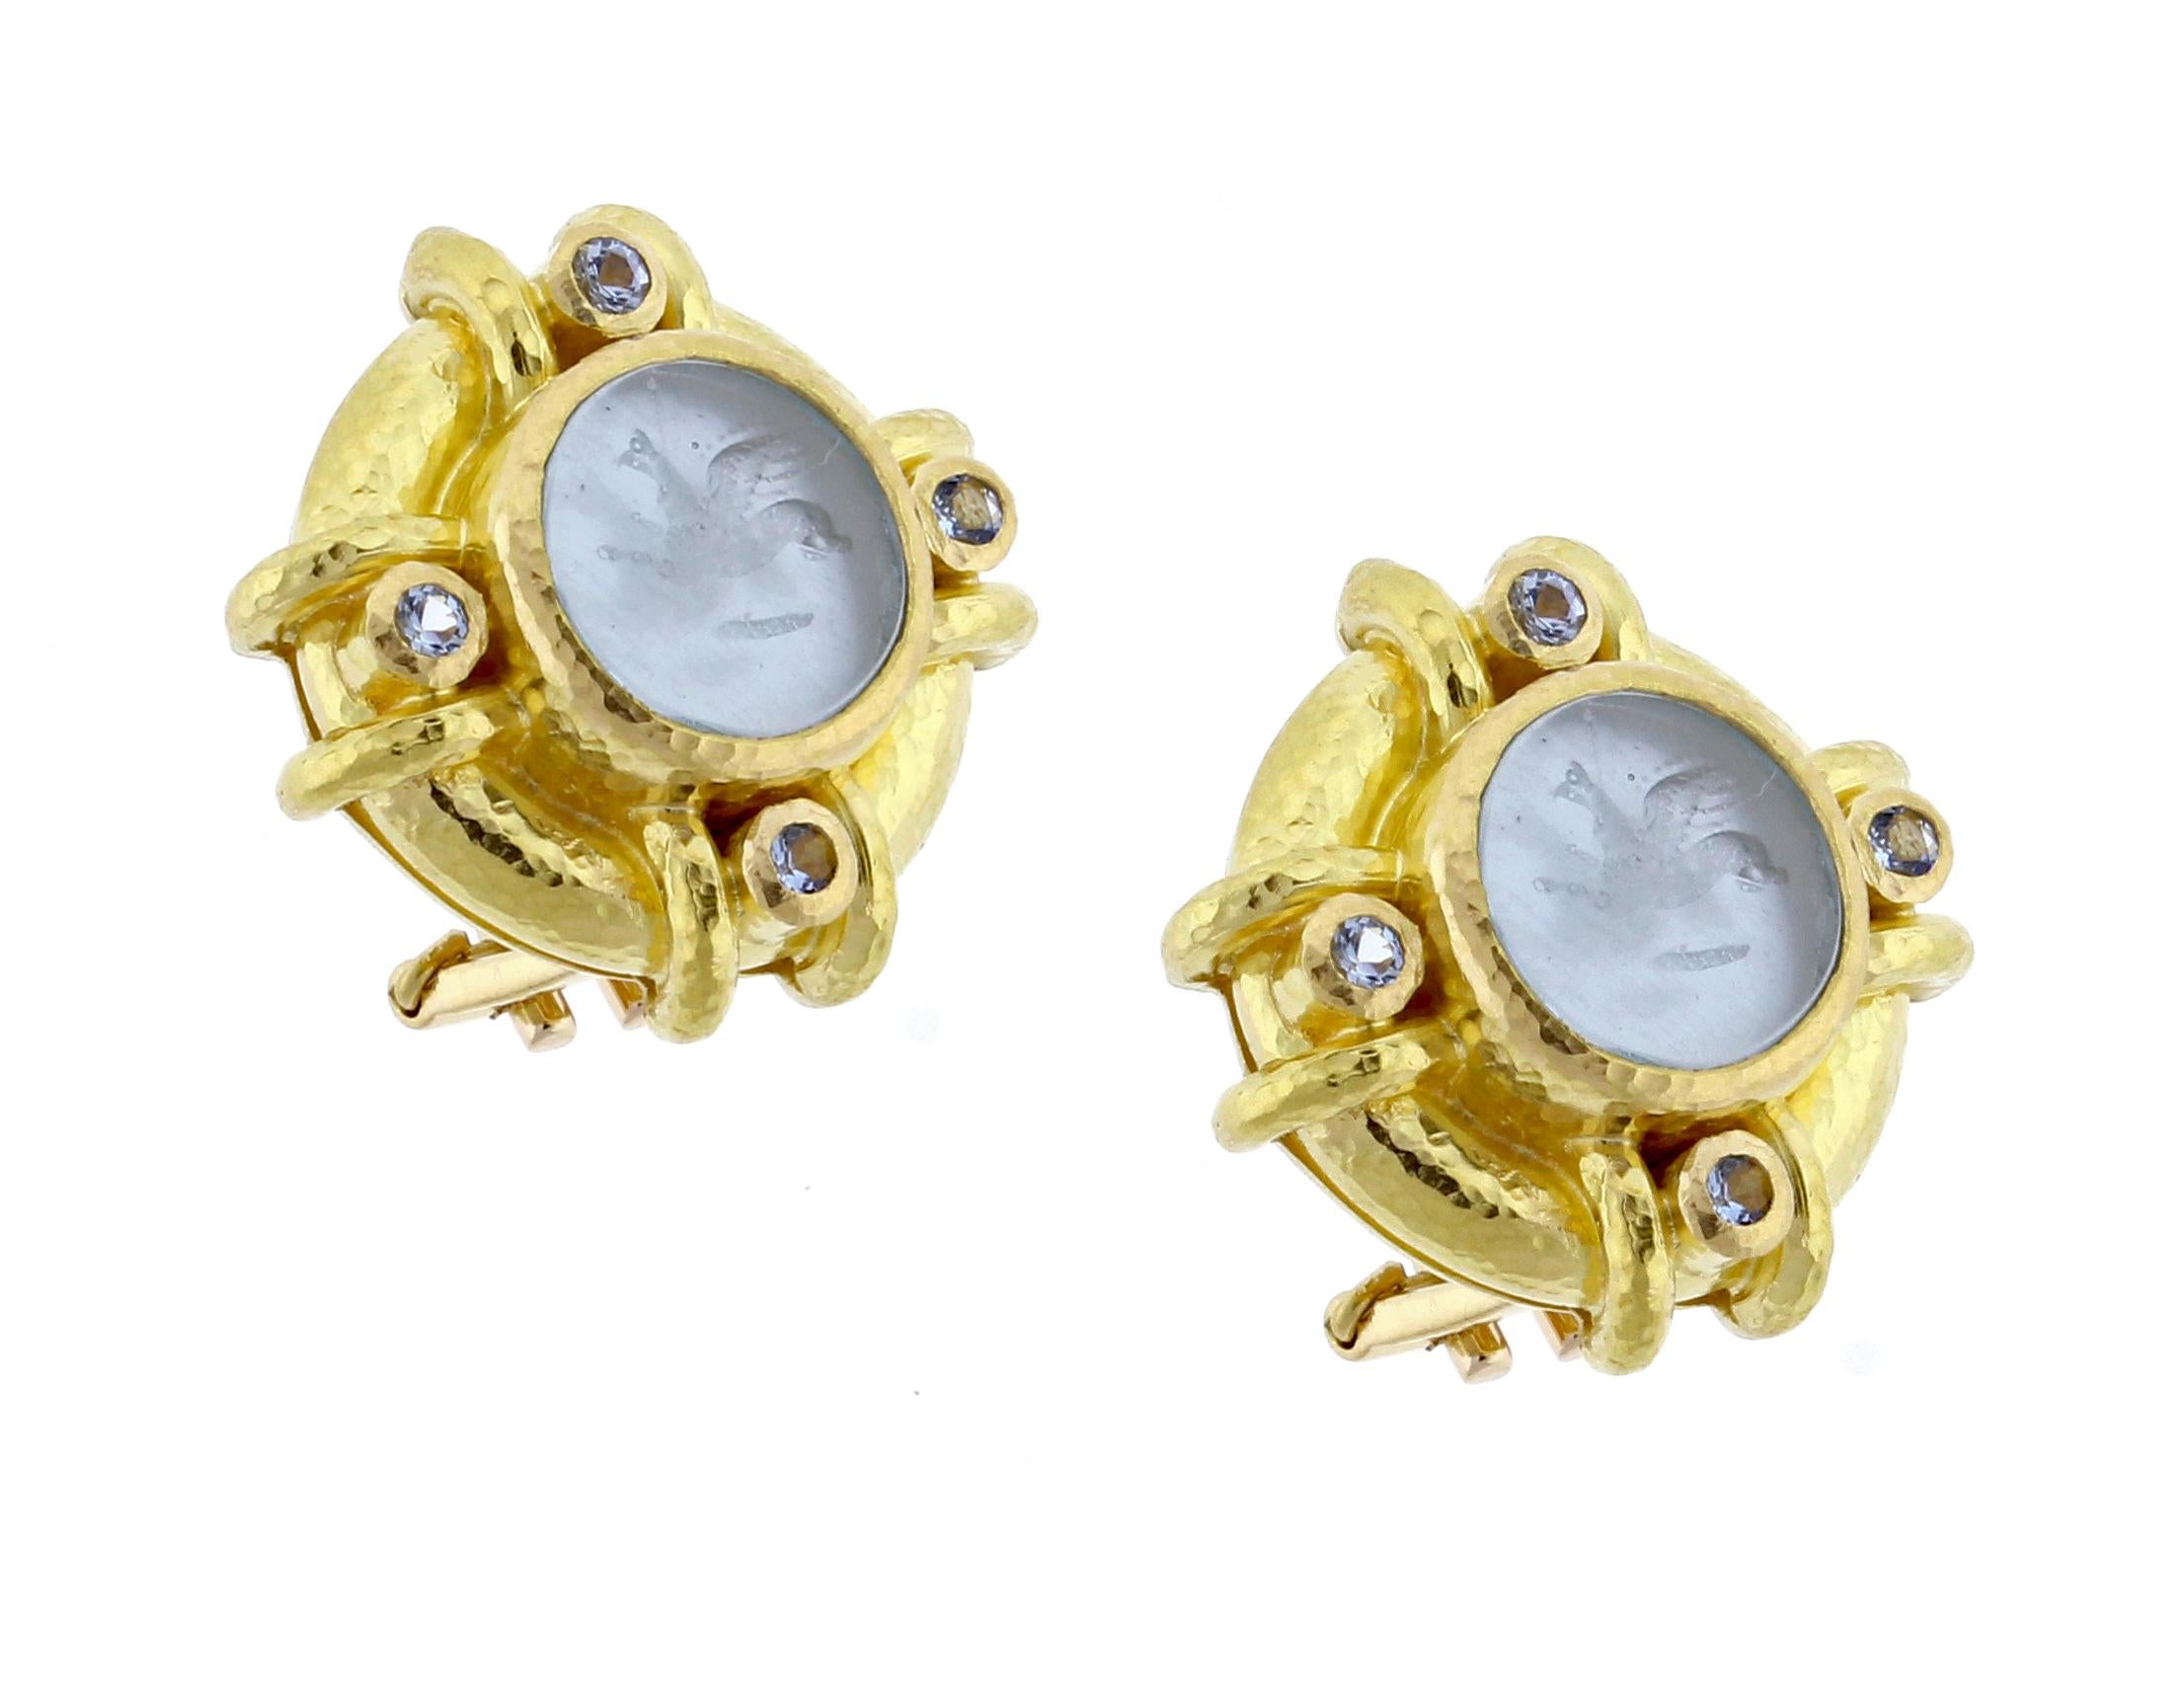 From  Elizabeth Locke, a pair of 19 Karat hammered gold earrings with a center Venetian glass intaglio with mother-of-pearl back. Intaglios made with modern glass using 17th century molds. Four faceted aquamarines.  Omega clip with fold-down post